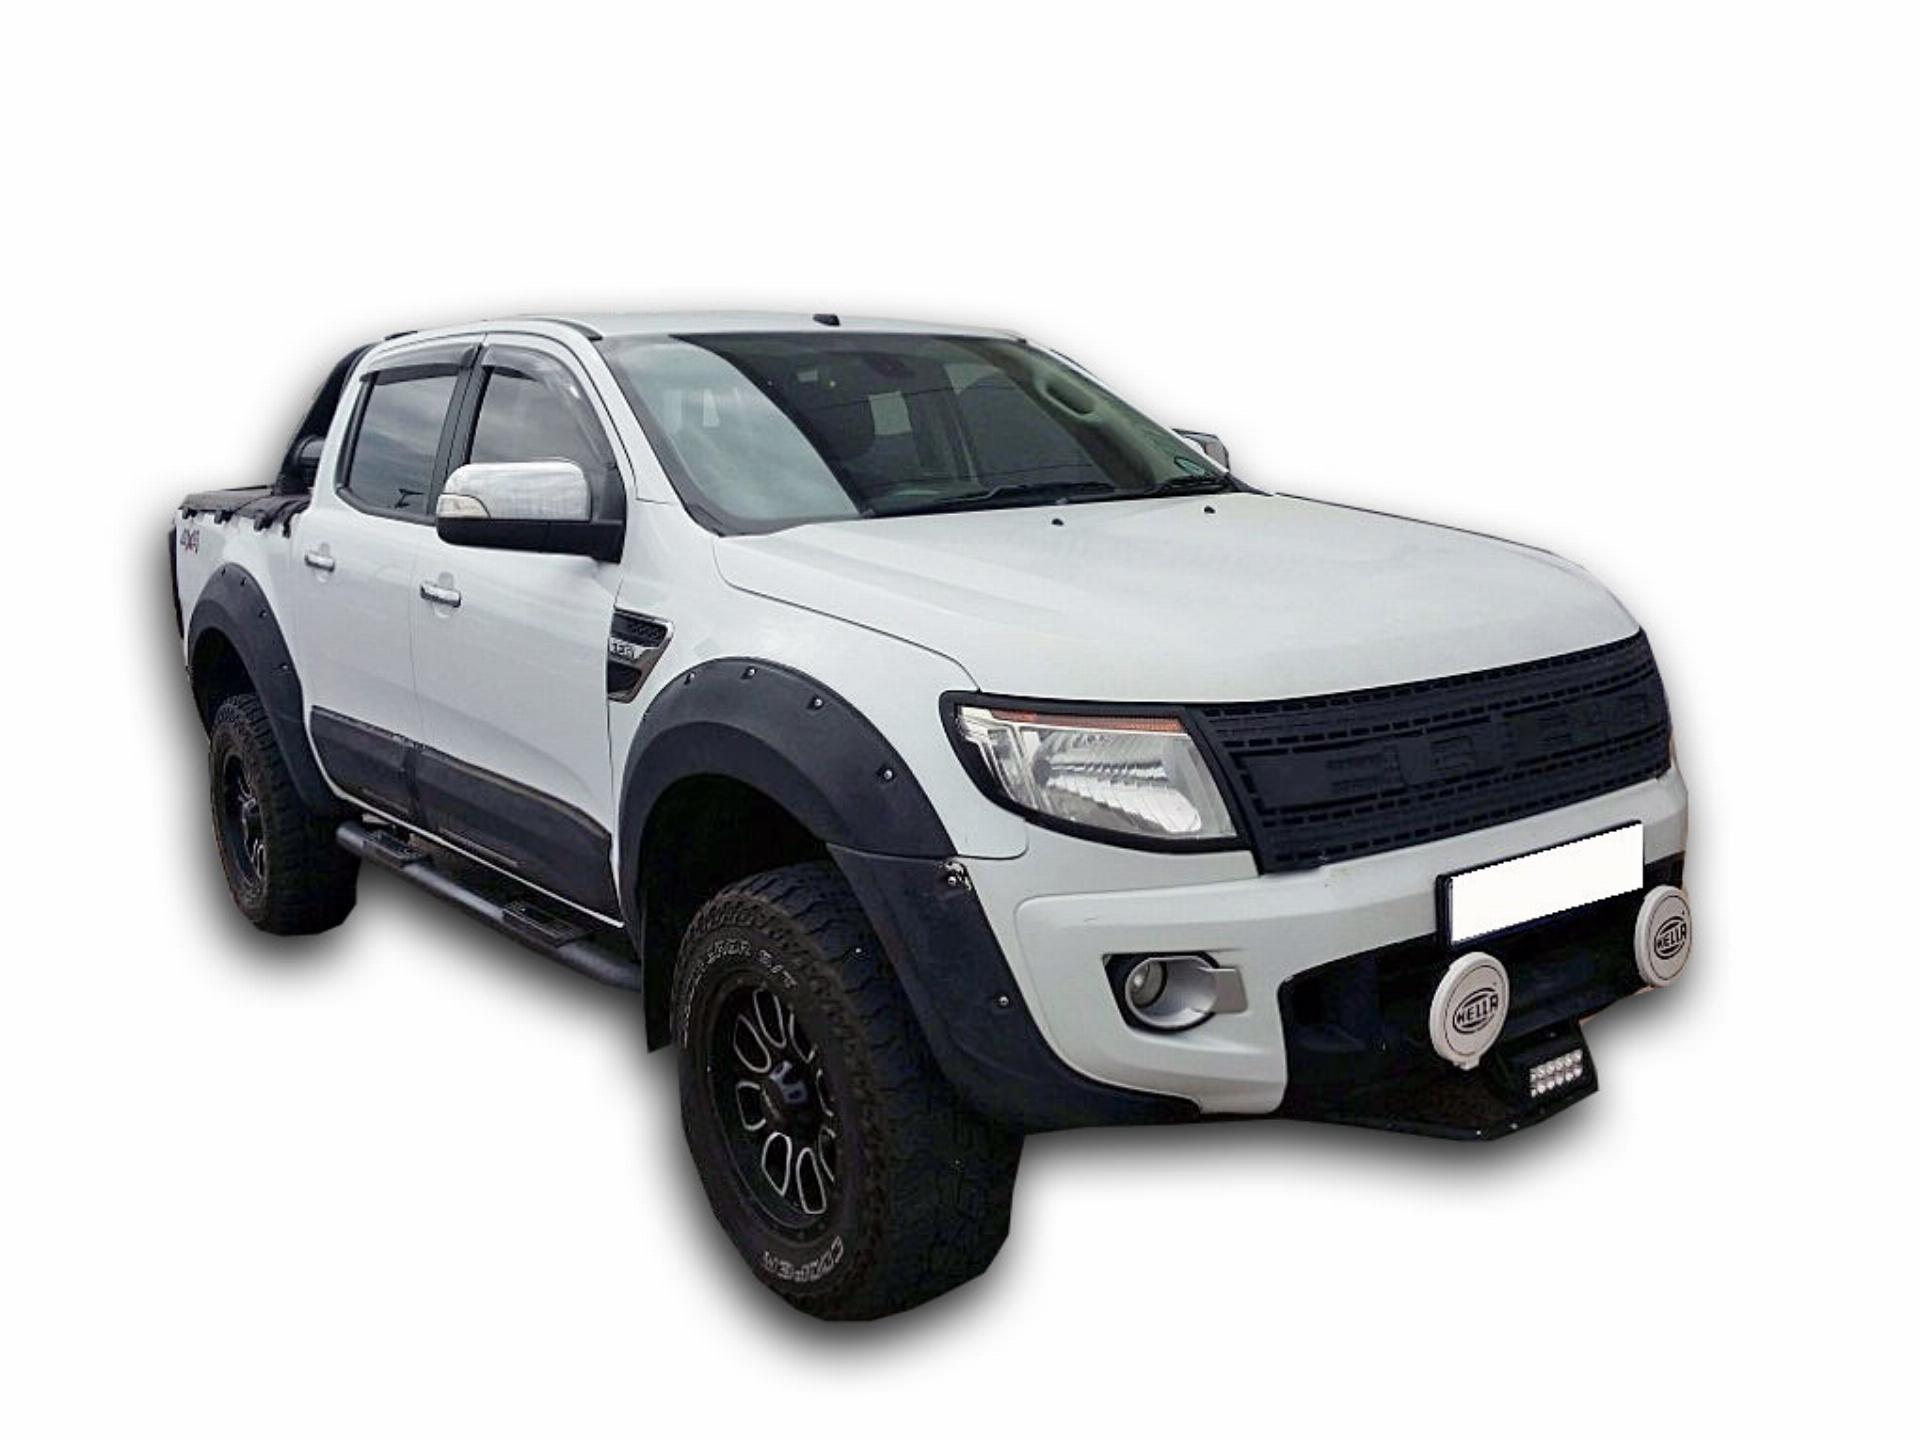 Ford Ranger 3.2 XLT 4X4 Automatic